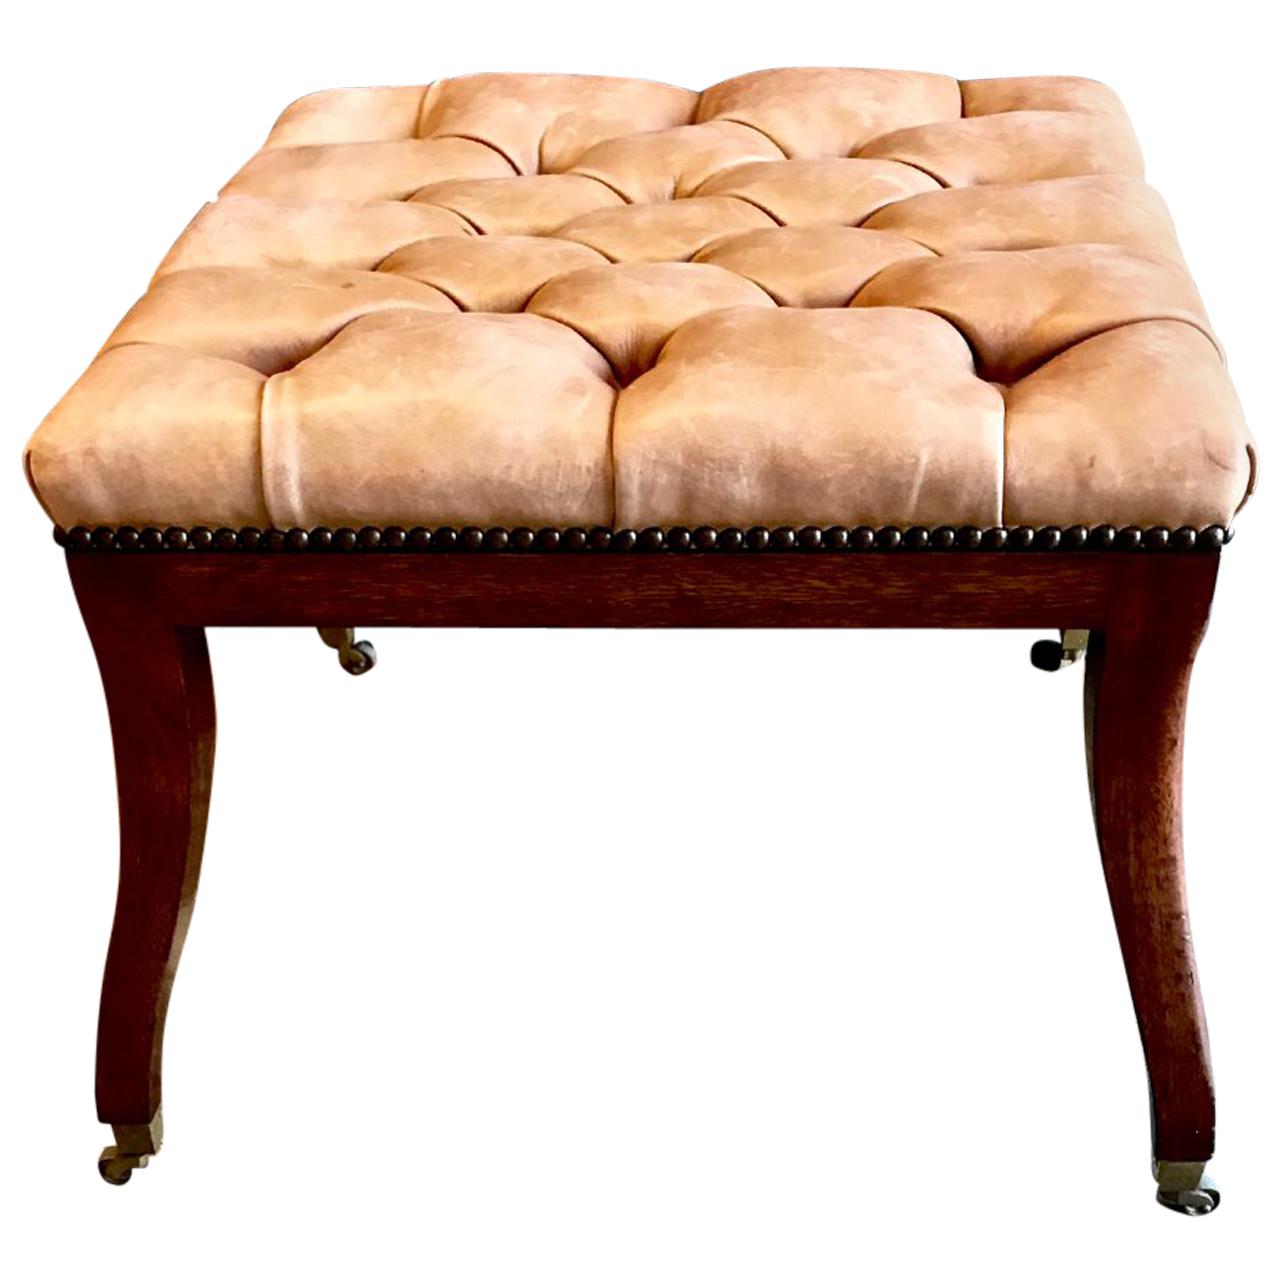 Regency Style Tufted Leather Bench